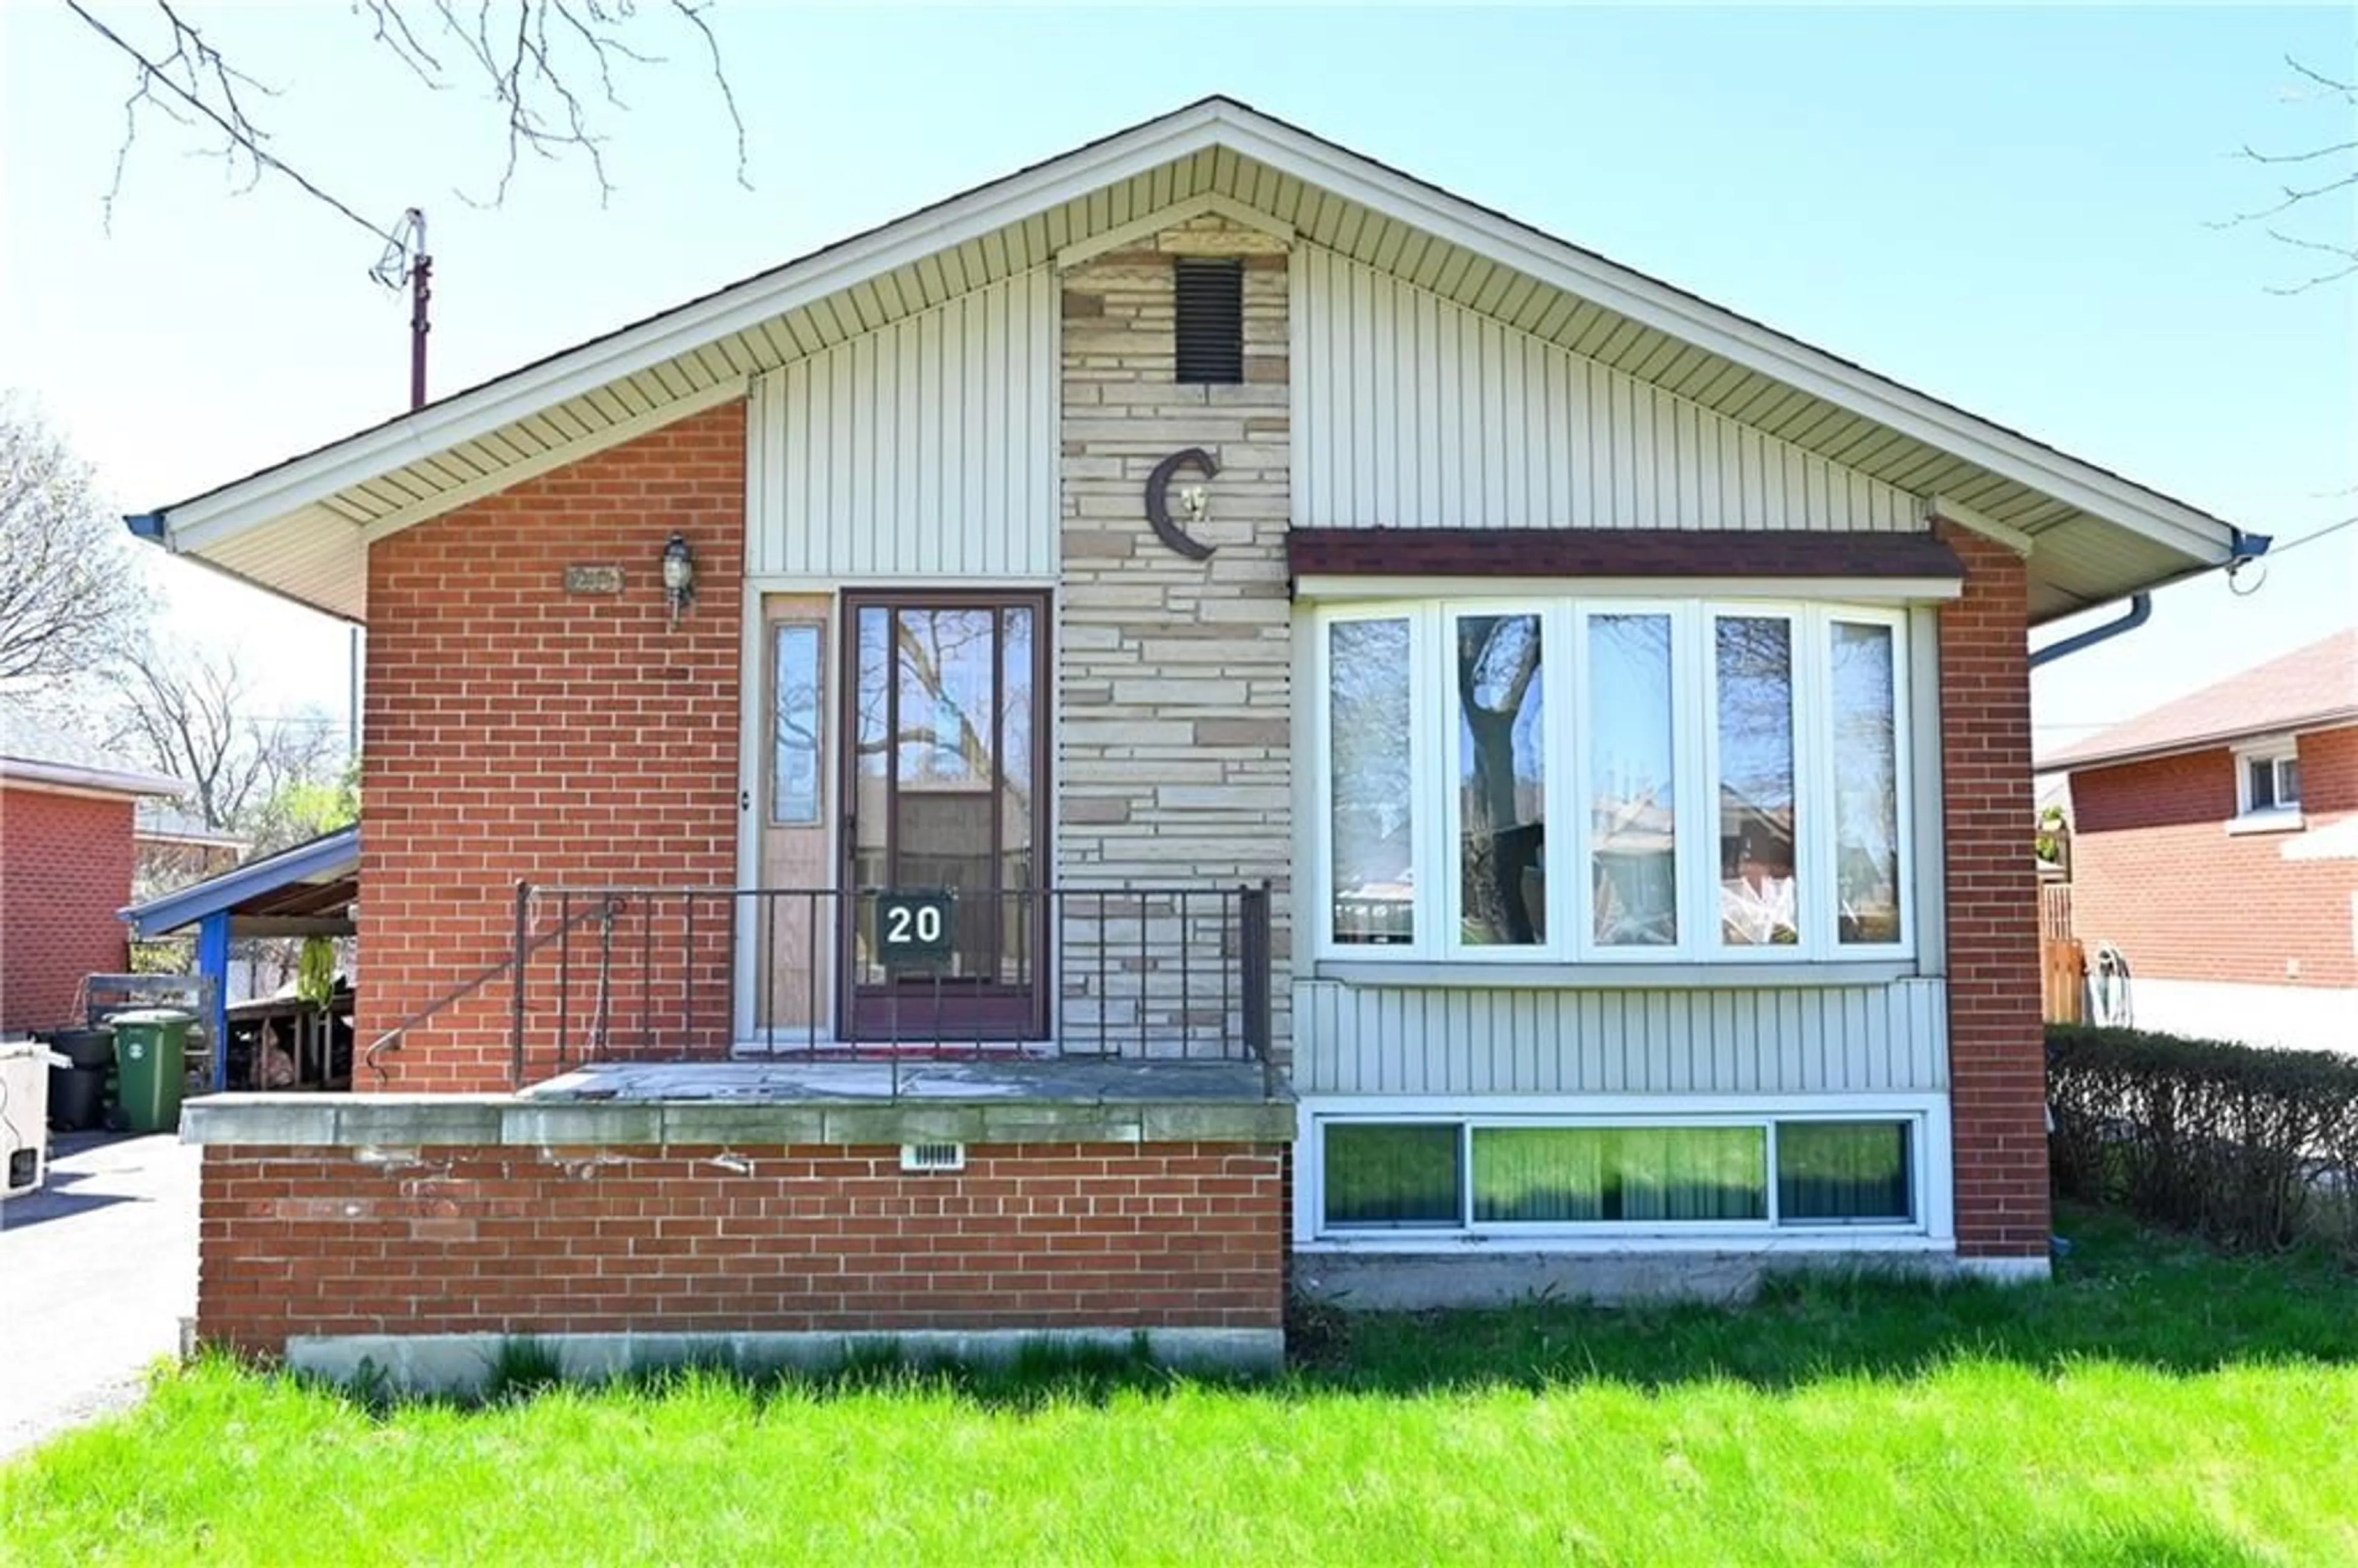 Home with brick exterior material for 20 BURFIELD Ave, Hamilton Ontario L8T 2J9